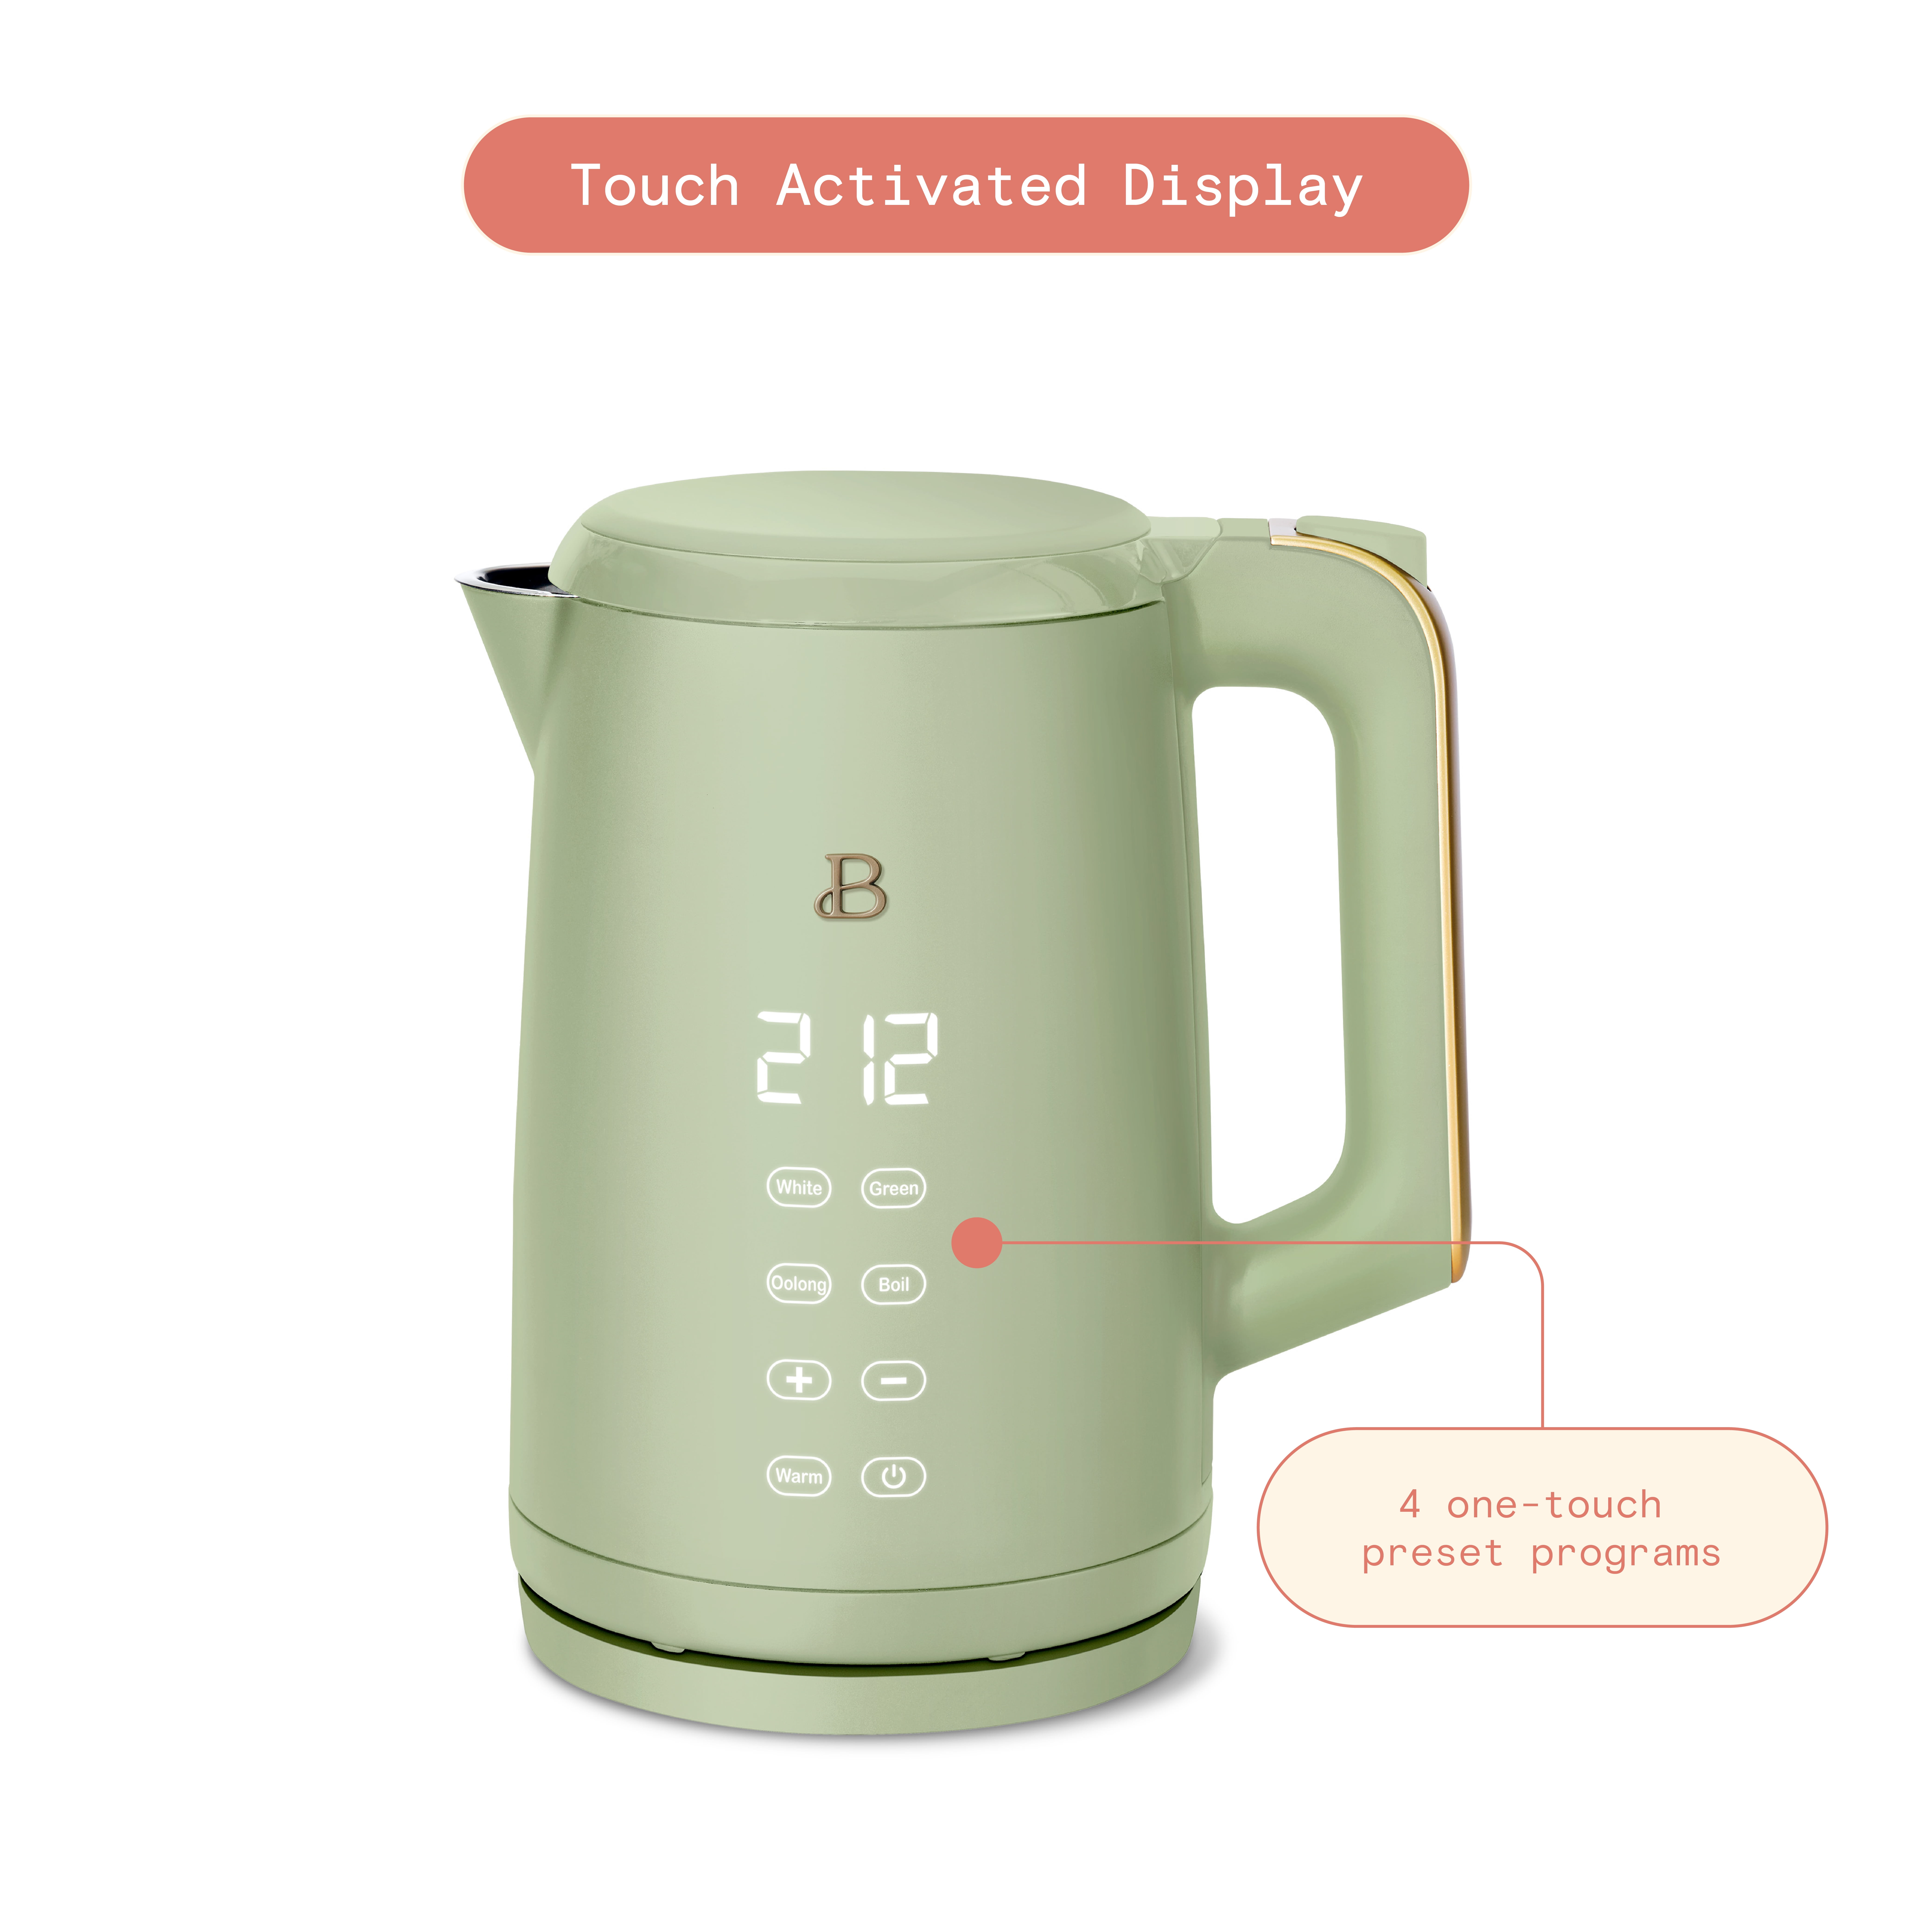 Beautiful 17 Liter Electric Kettle 1500 W with One Touch Activation White  Icing by Drew Barrymore｜TikTok Search